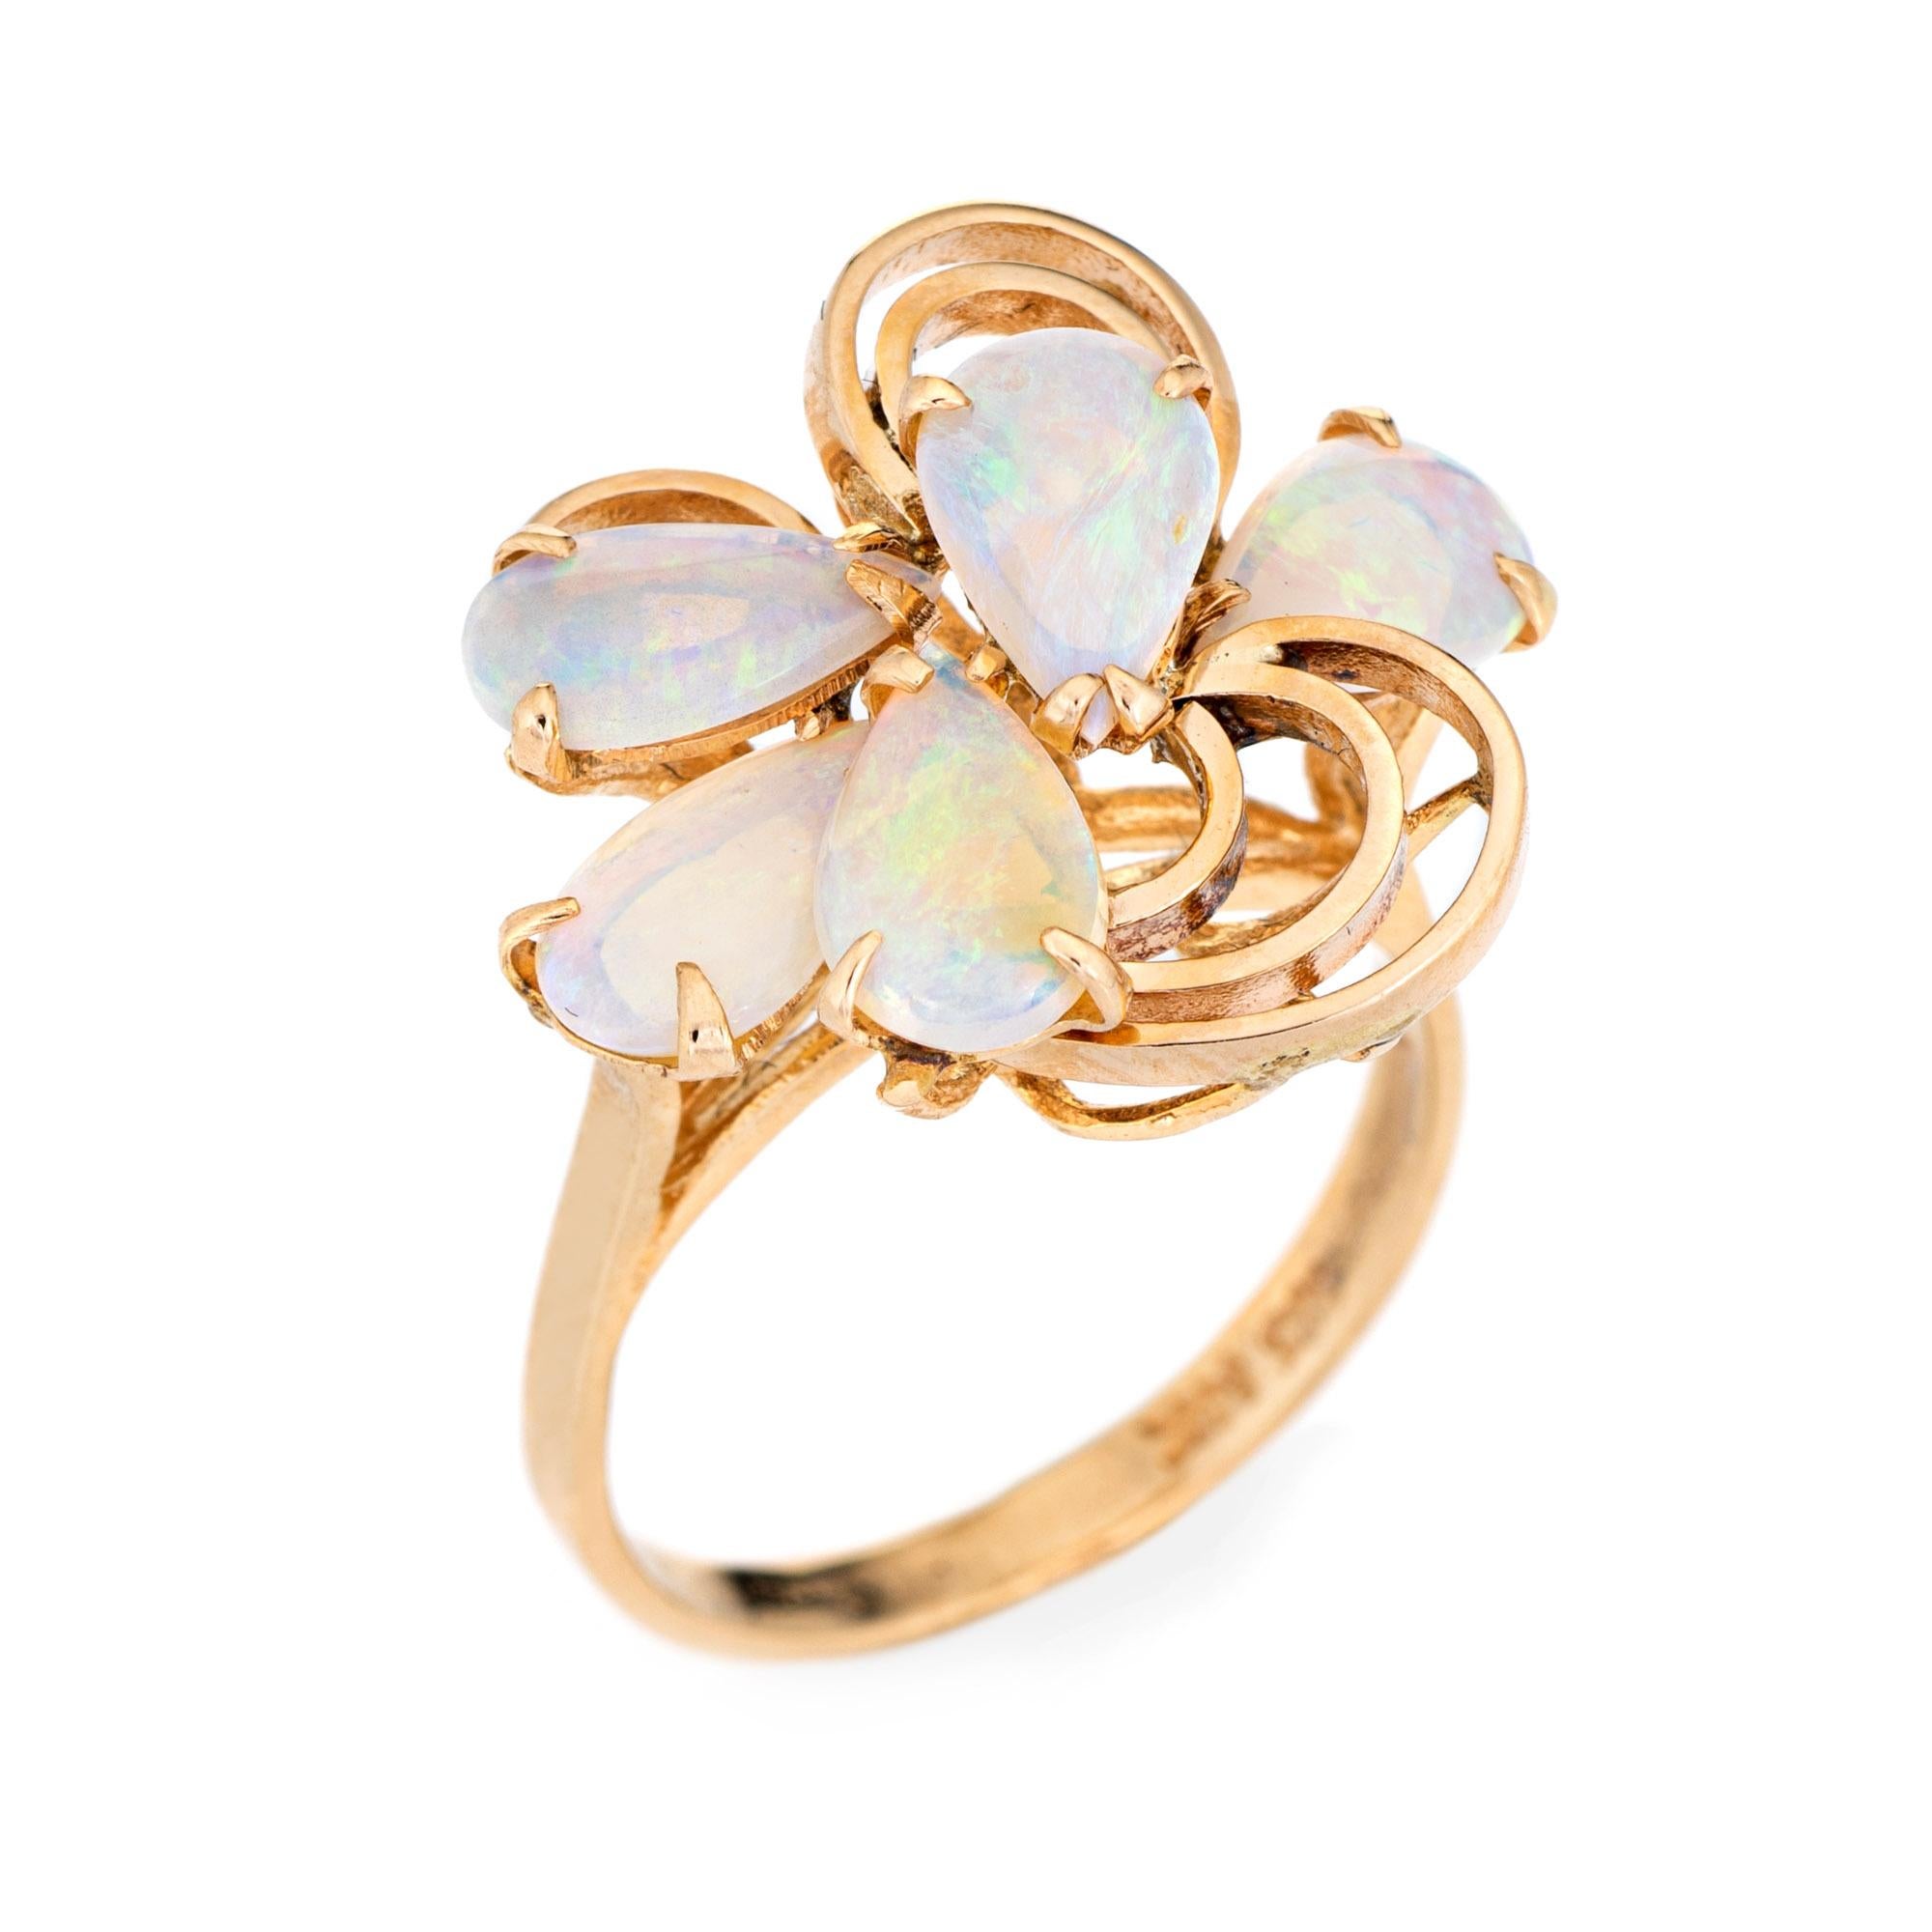 Stylish vintage opal ring (circa 1970s) crafted in 14 karat yellow gold. 

Five cabochon cut teardrop shaped opals measure 8mm x 5mm (estimated at 0.50 carats each - 2.50 carats total estimated weight). The opals are in very good condition and free